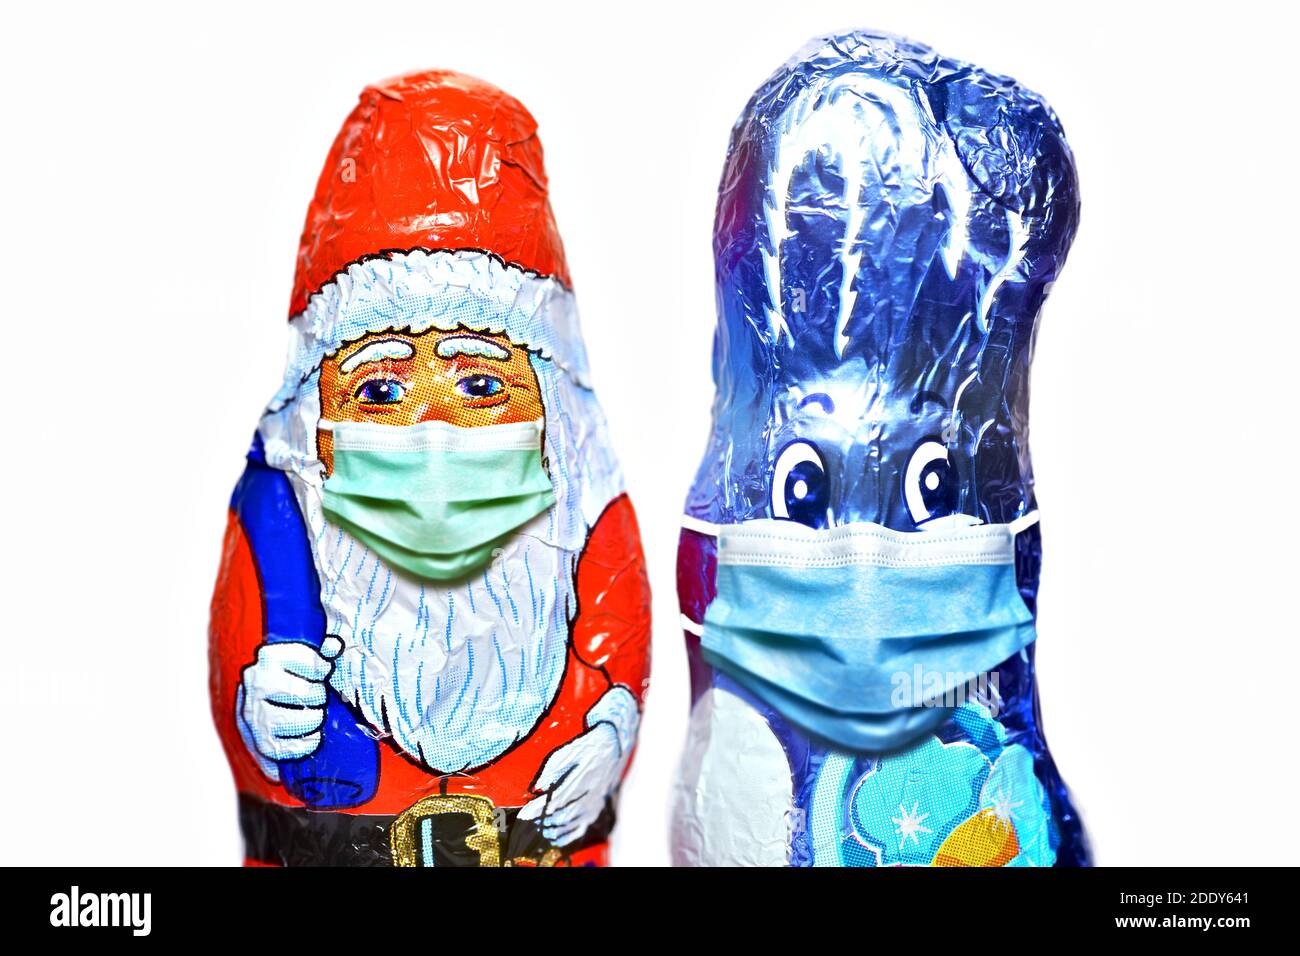 Santa Claus and Easter Bunny chocolate figures wearing face masks Stock Photo